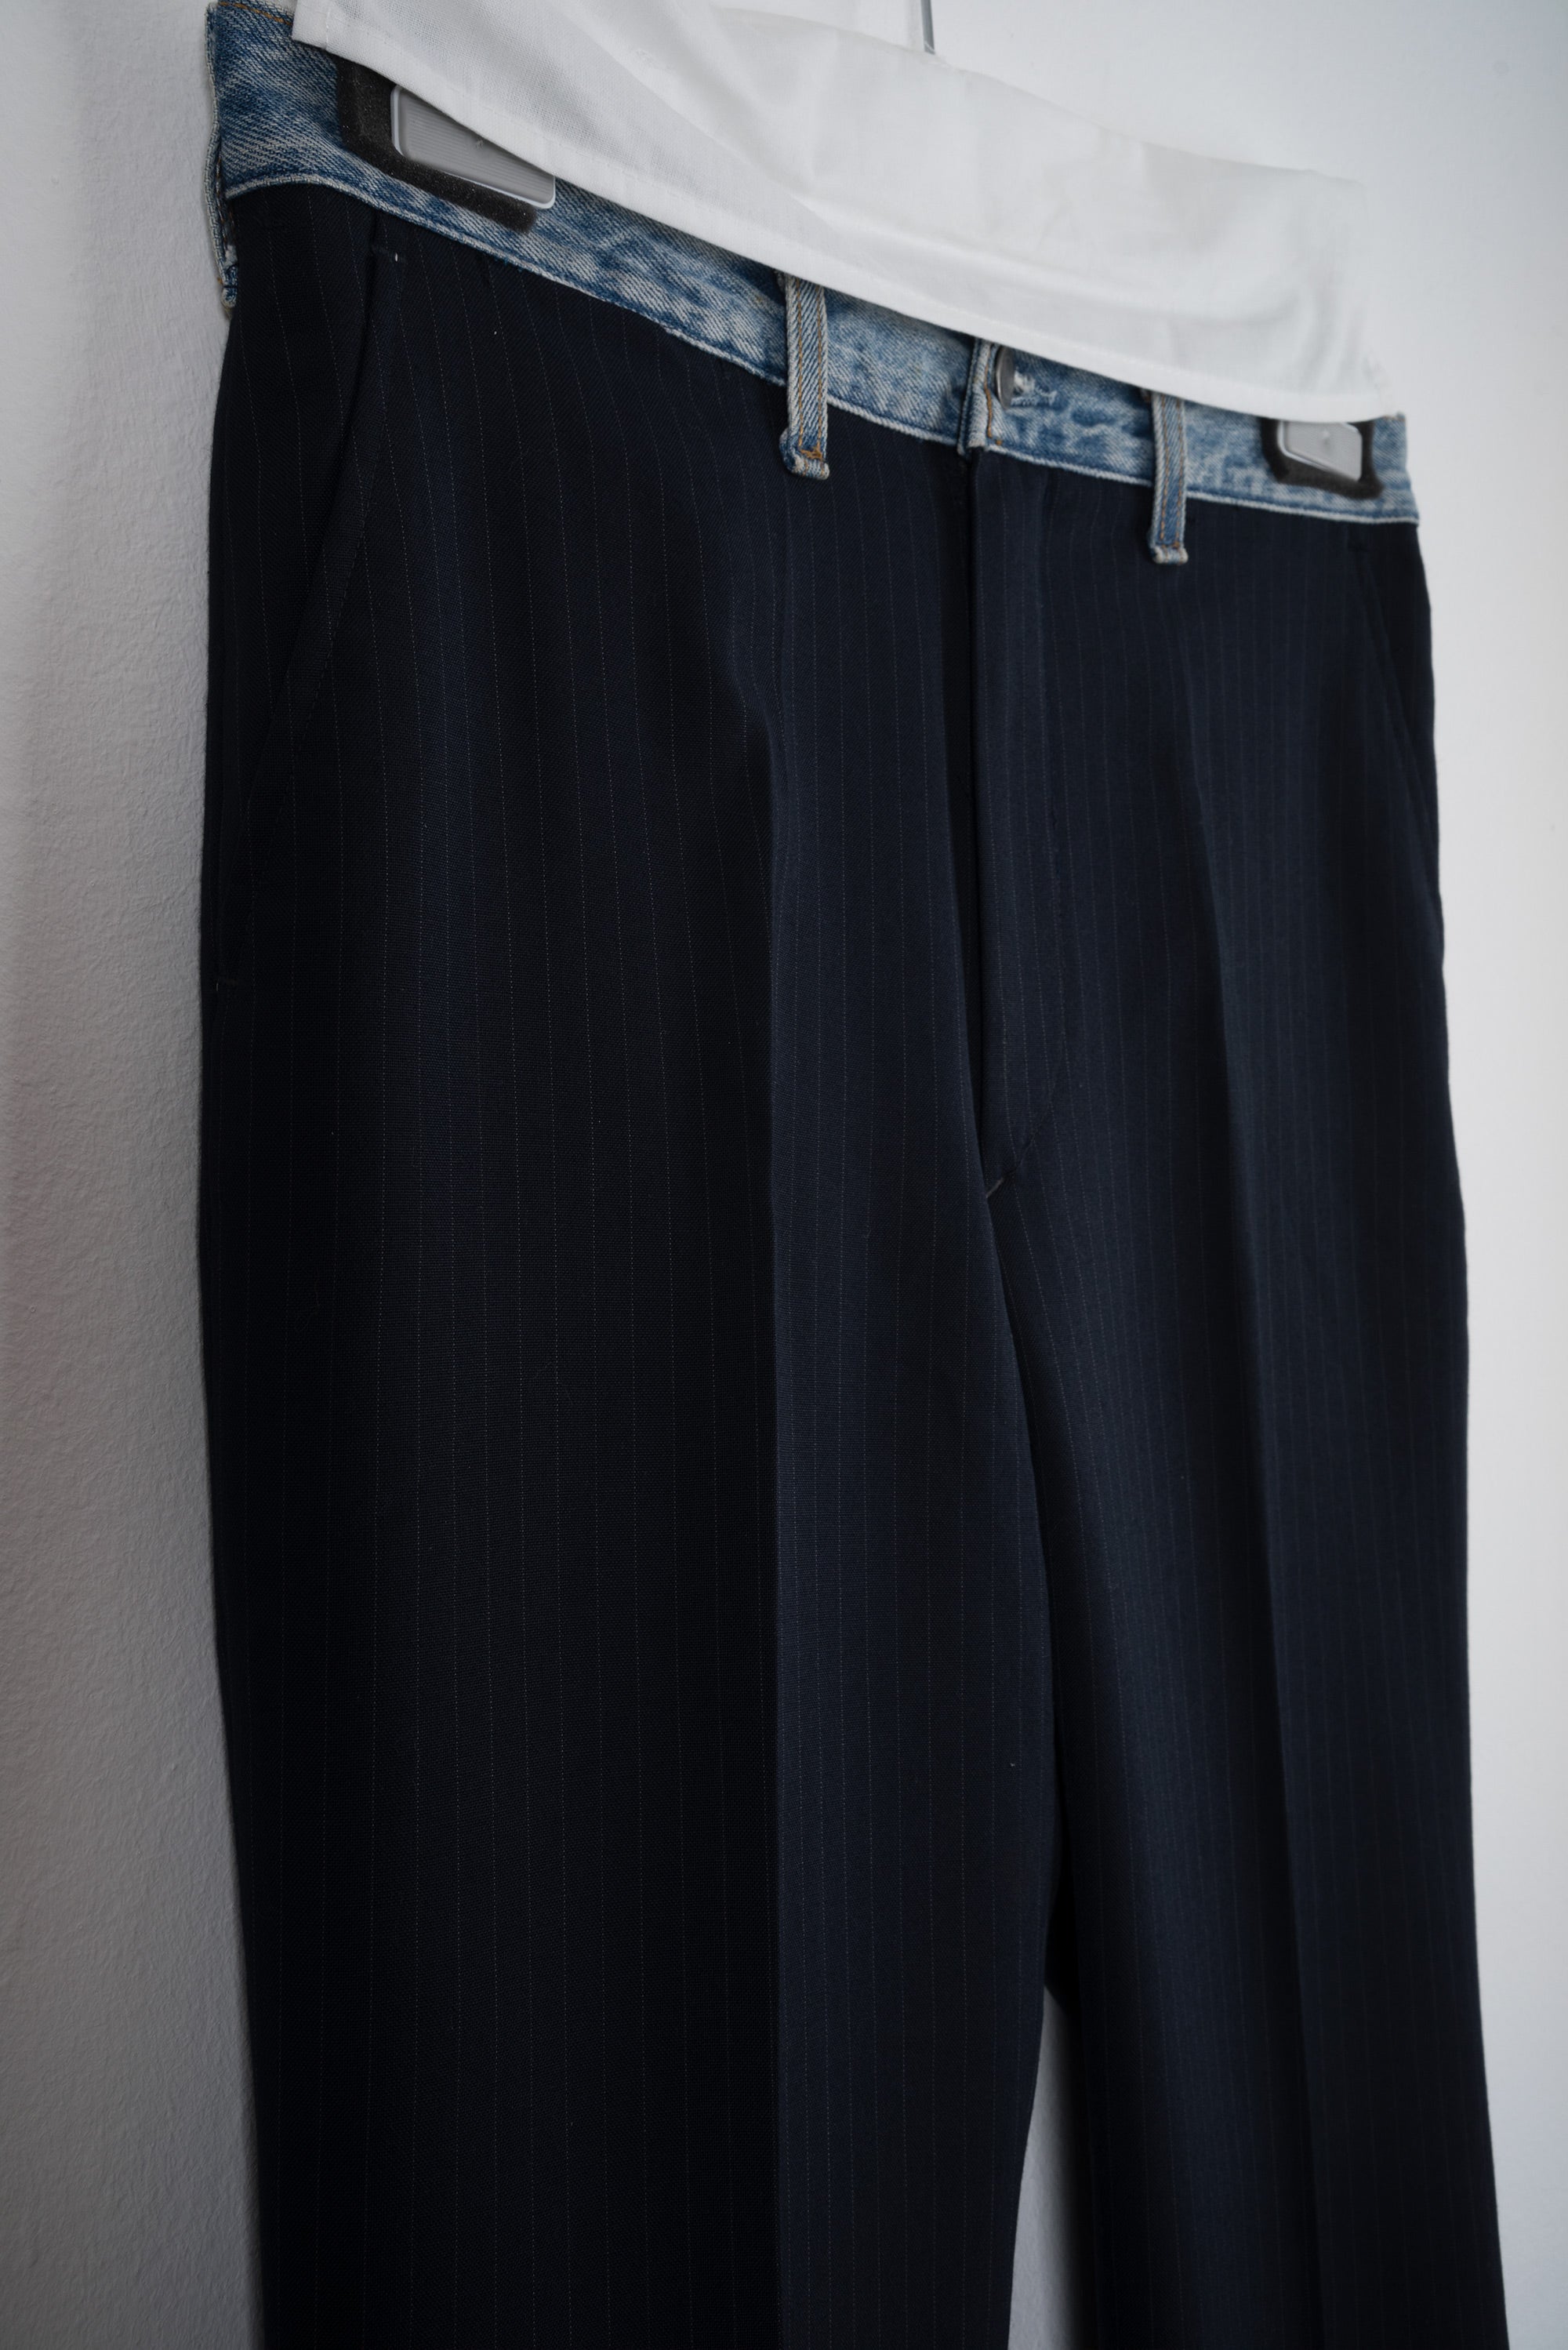 2004 S/S ARTISANAL REWORKED TROUSERS WITH INSERTED JEANS WAISTBAND